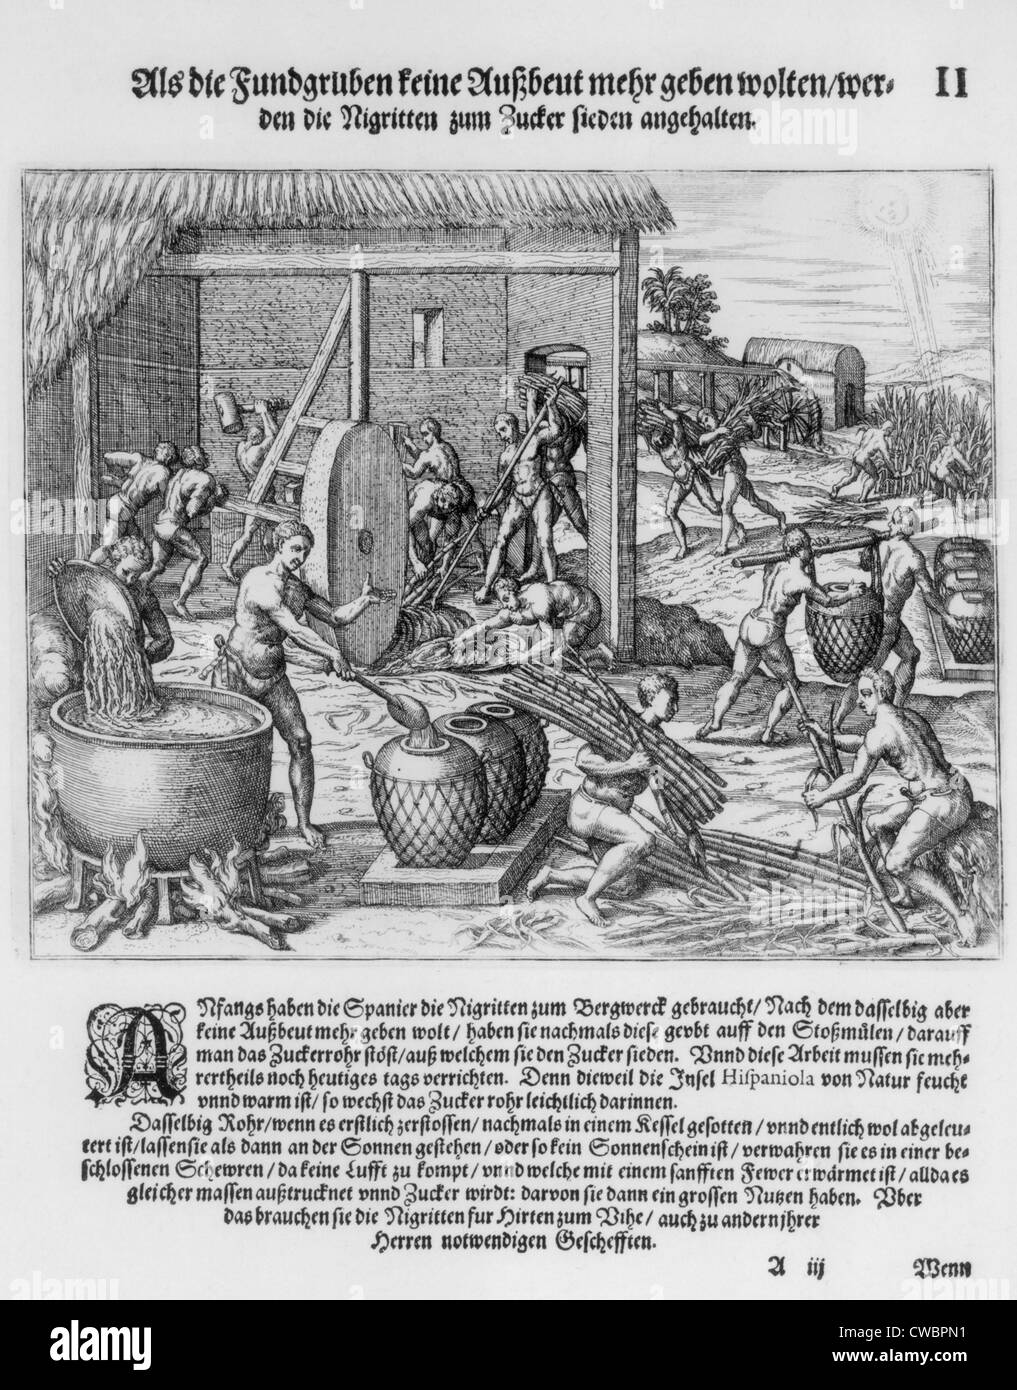 African slaves processing sugar cane on Hispaniola. 1595 engraving by Theodor de Bry show harvesting the cane, a slave powered Stock Photo